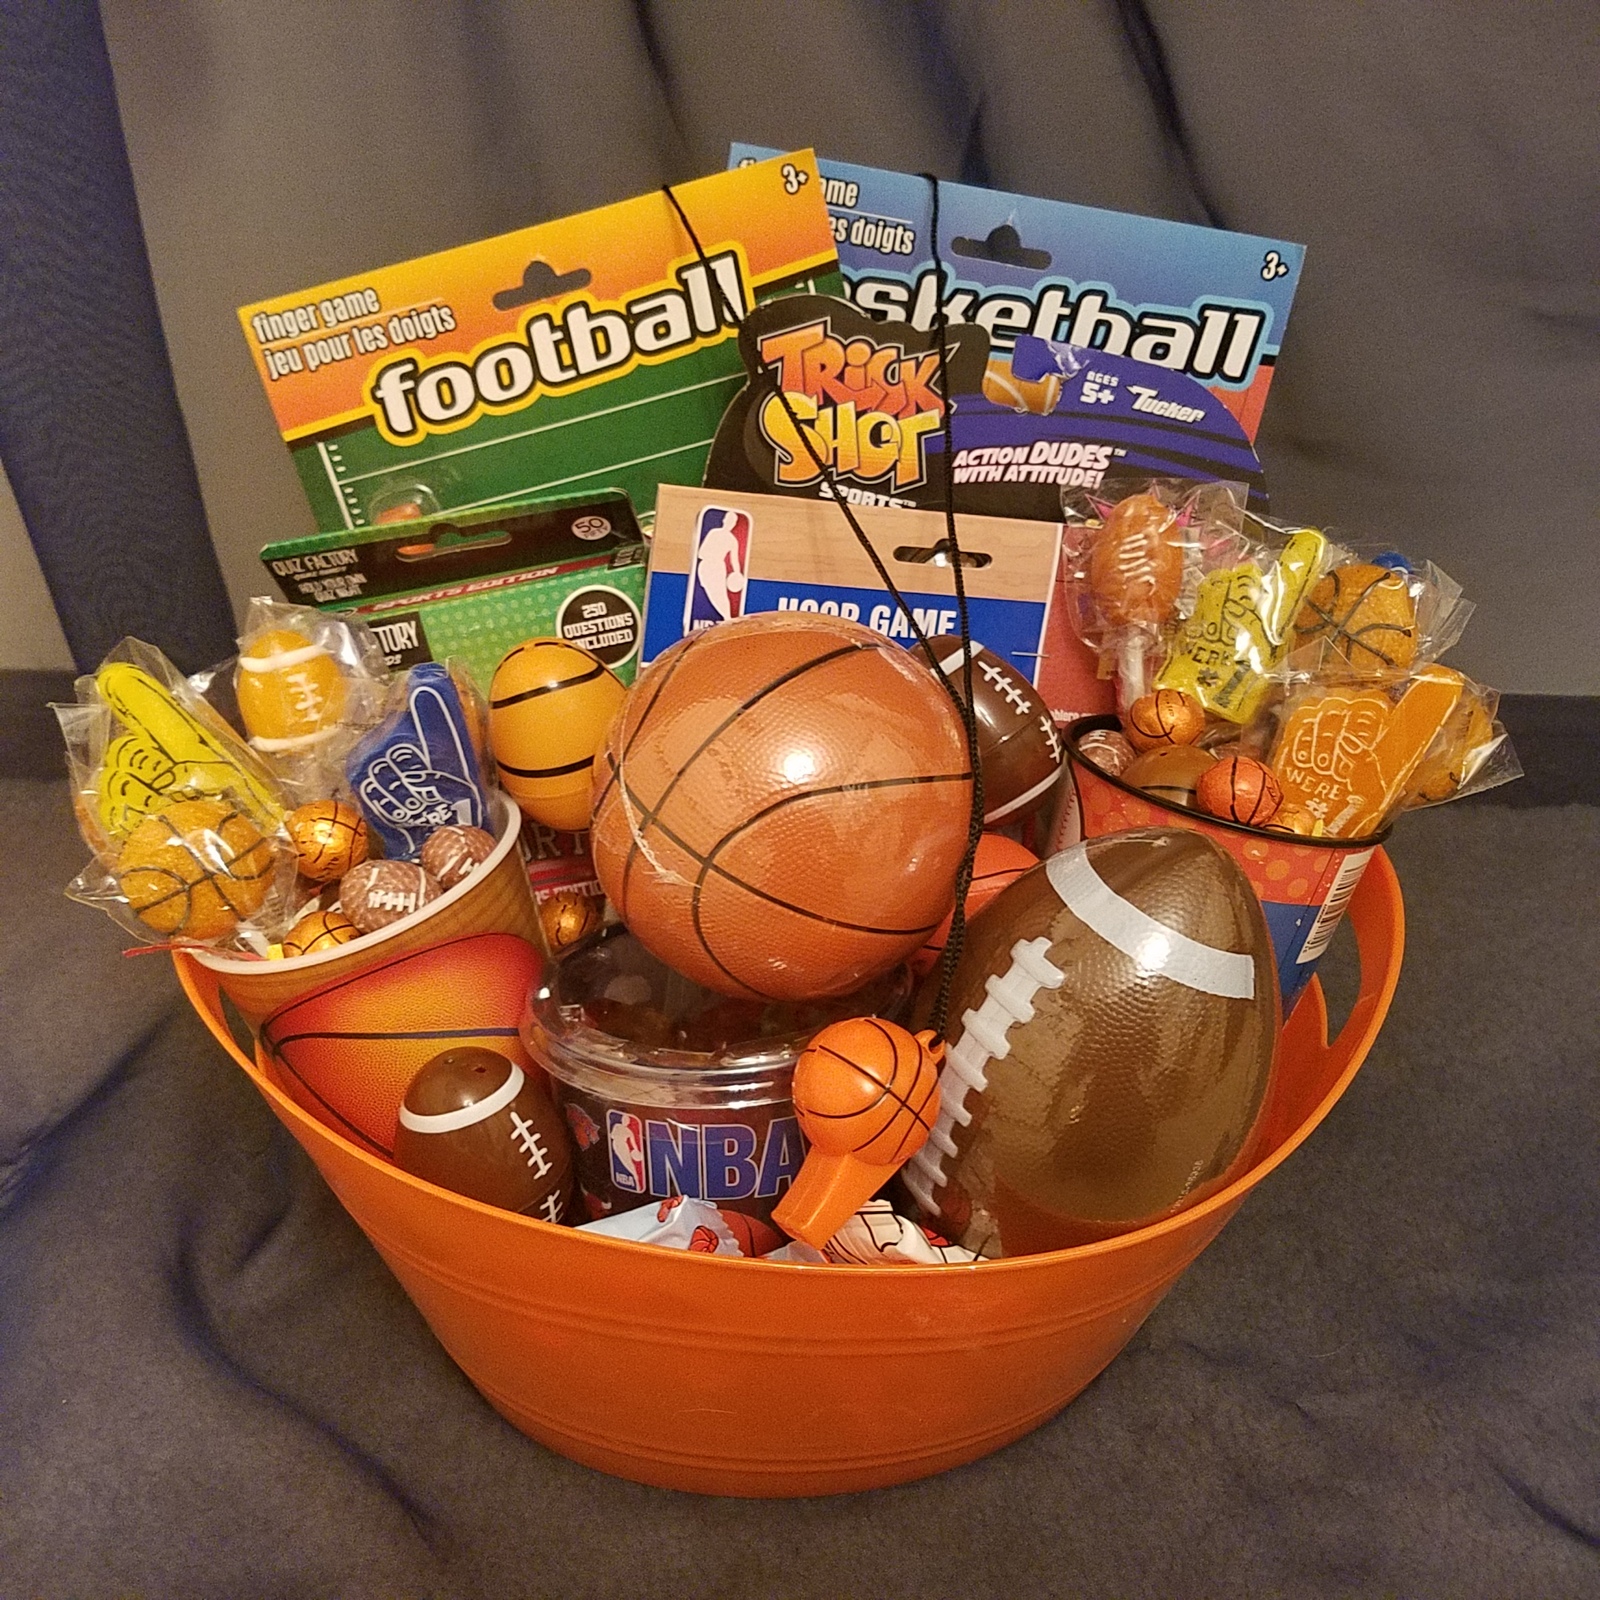 A unique gift idea for that fan young or old The basket contains all Footba...